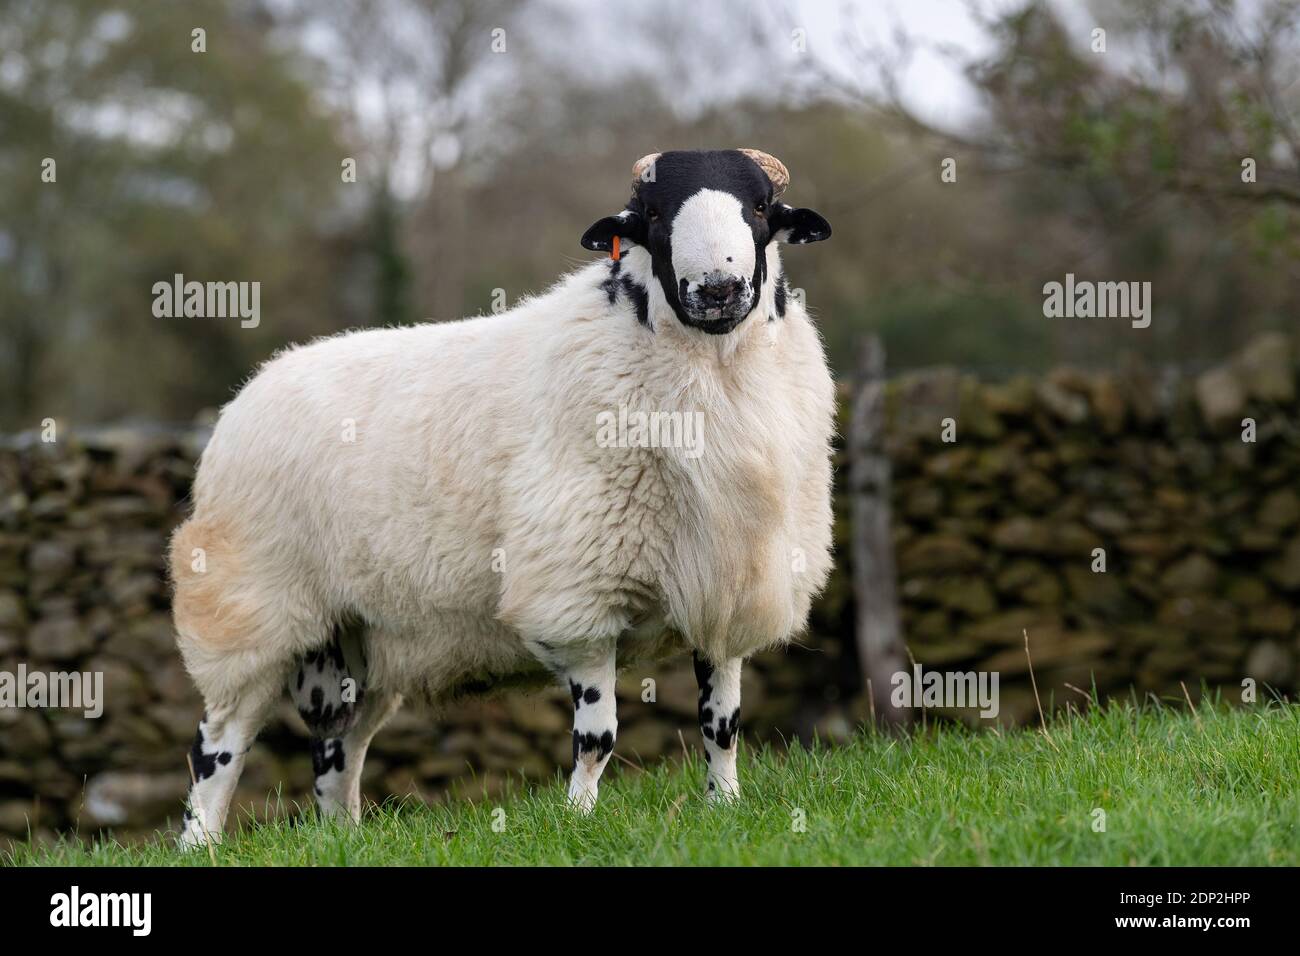 Rough Fell rams, native to the Howgill fells in Cumbria ready for the autumn sales. UK Stock Photo